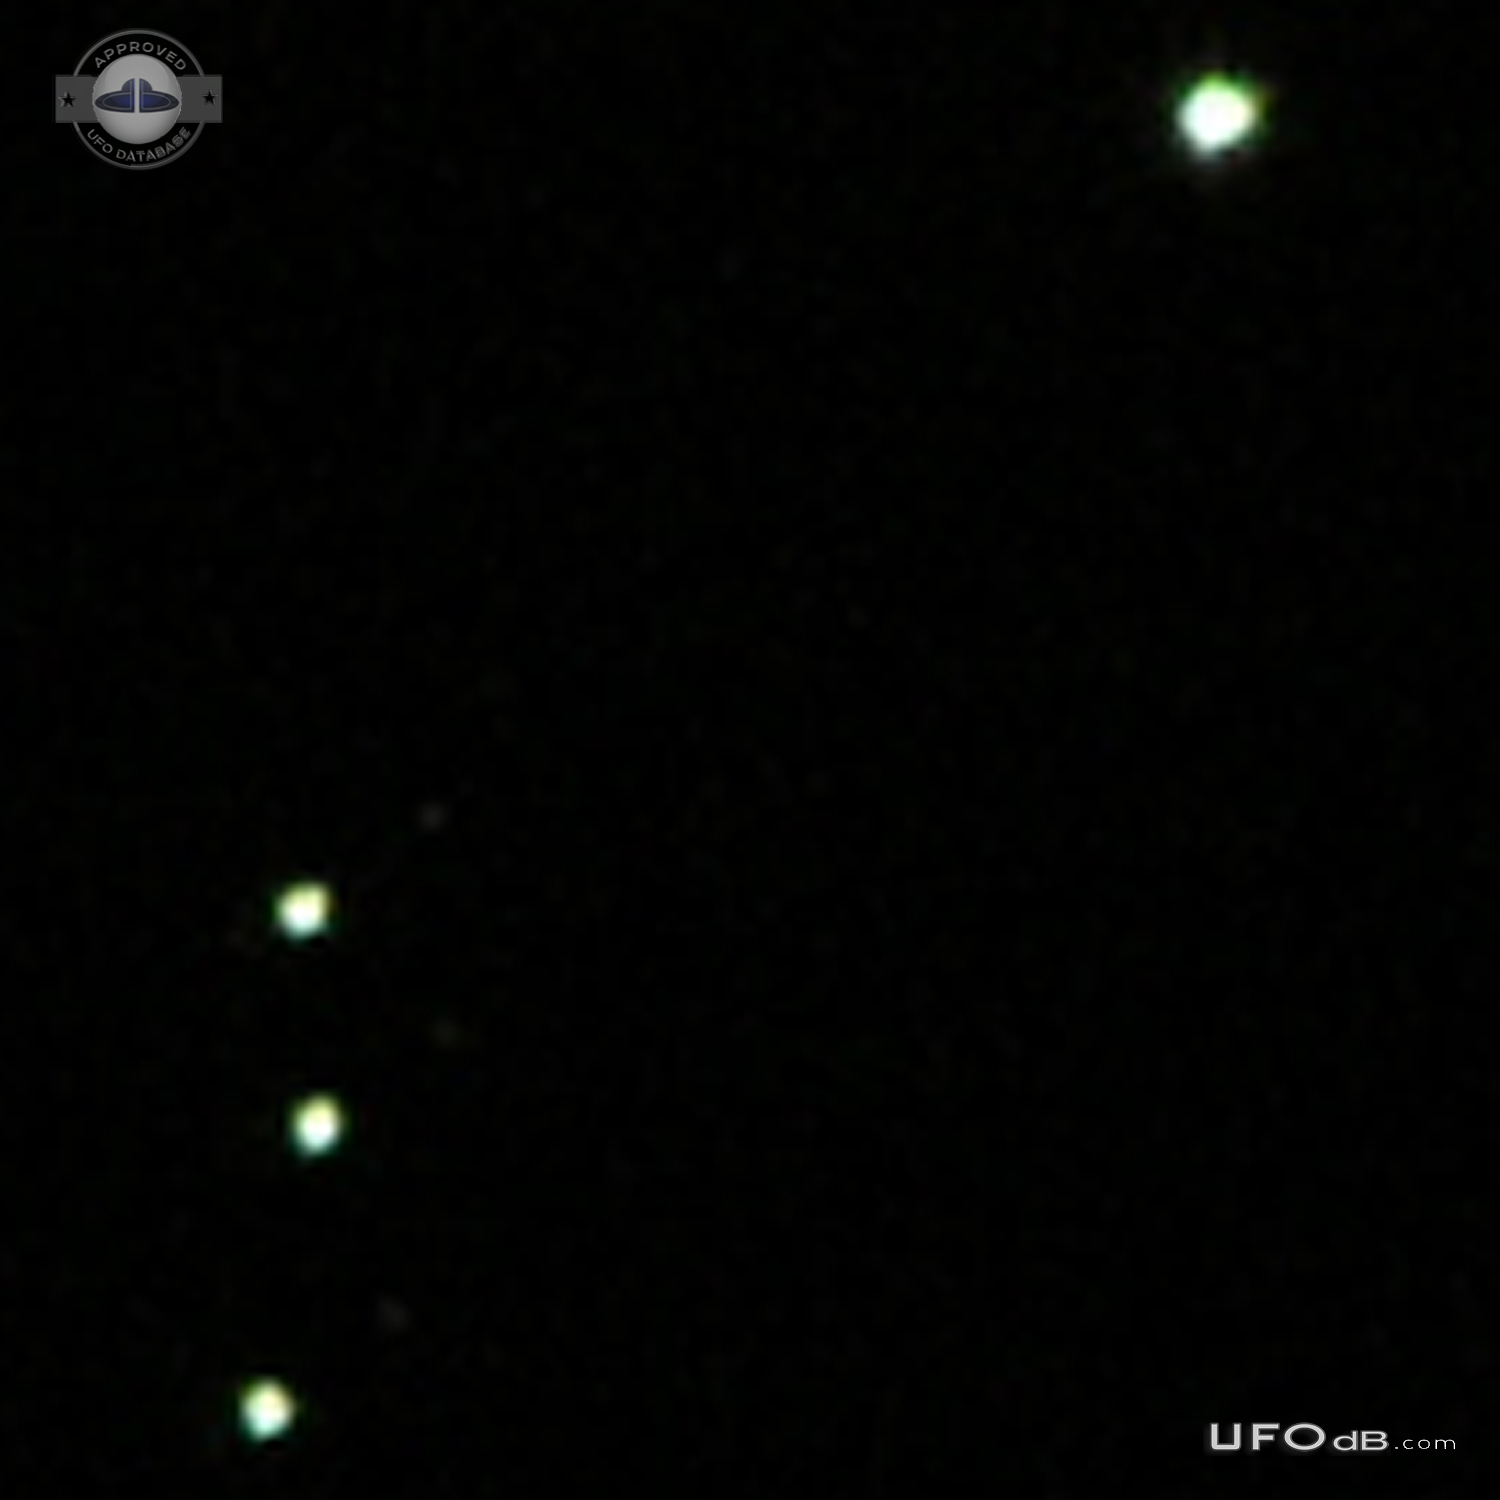 Multiple UFOs alternately flashing and circling each other in groups - UFO Picture #712-6